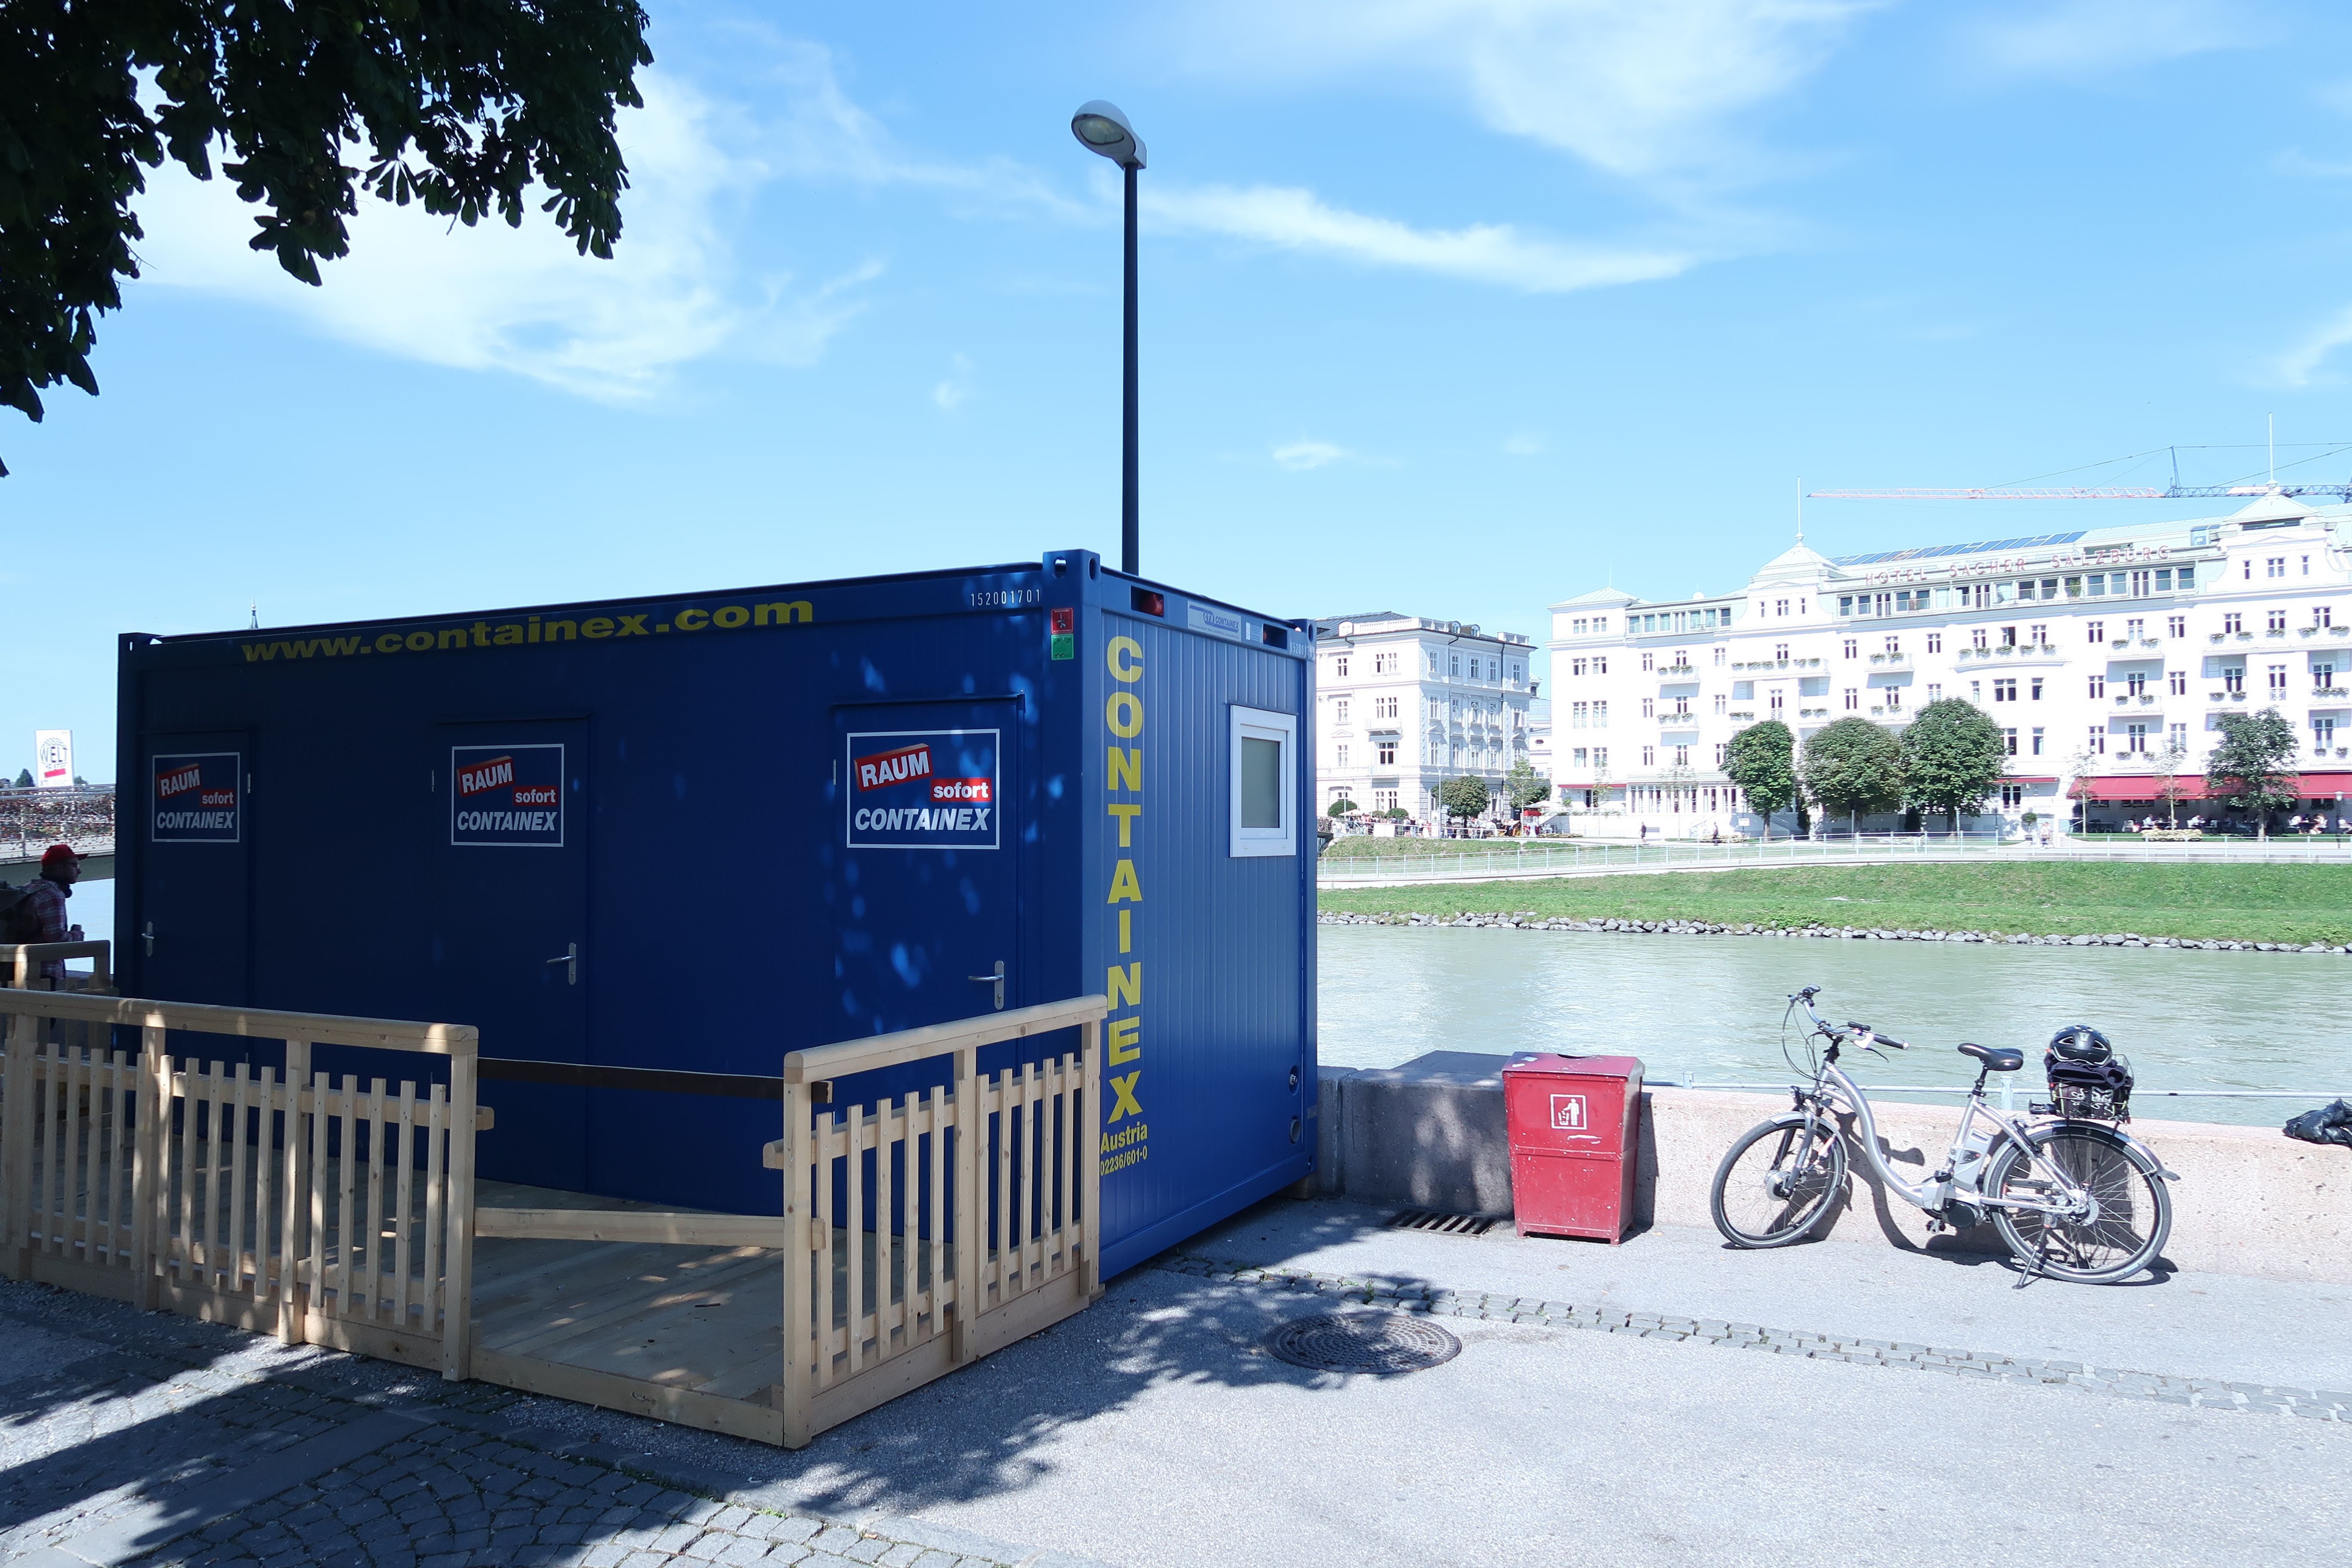 Portable toilet cabins and sanitary cabins